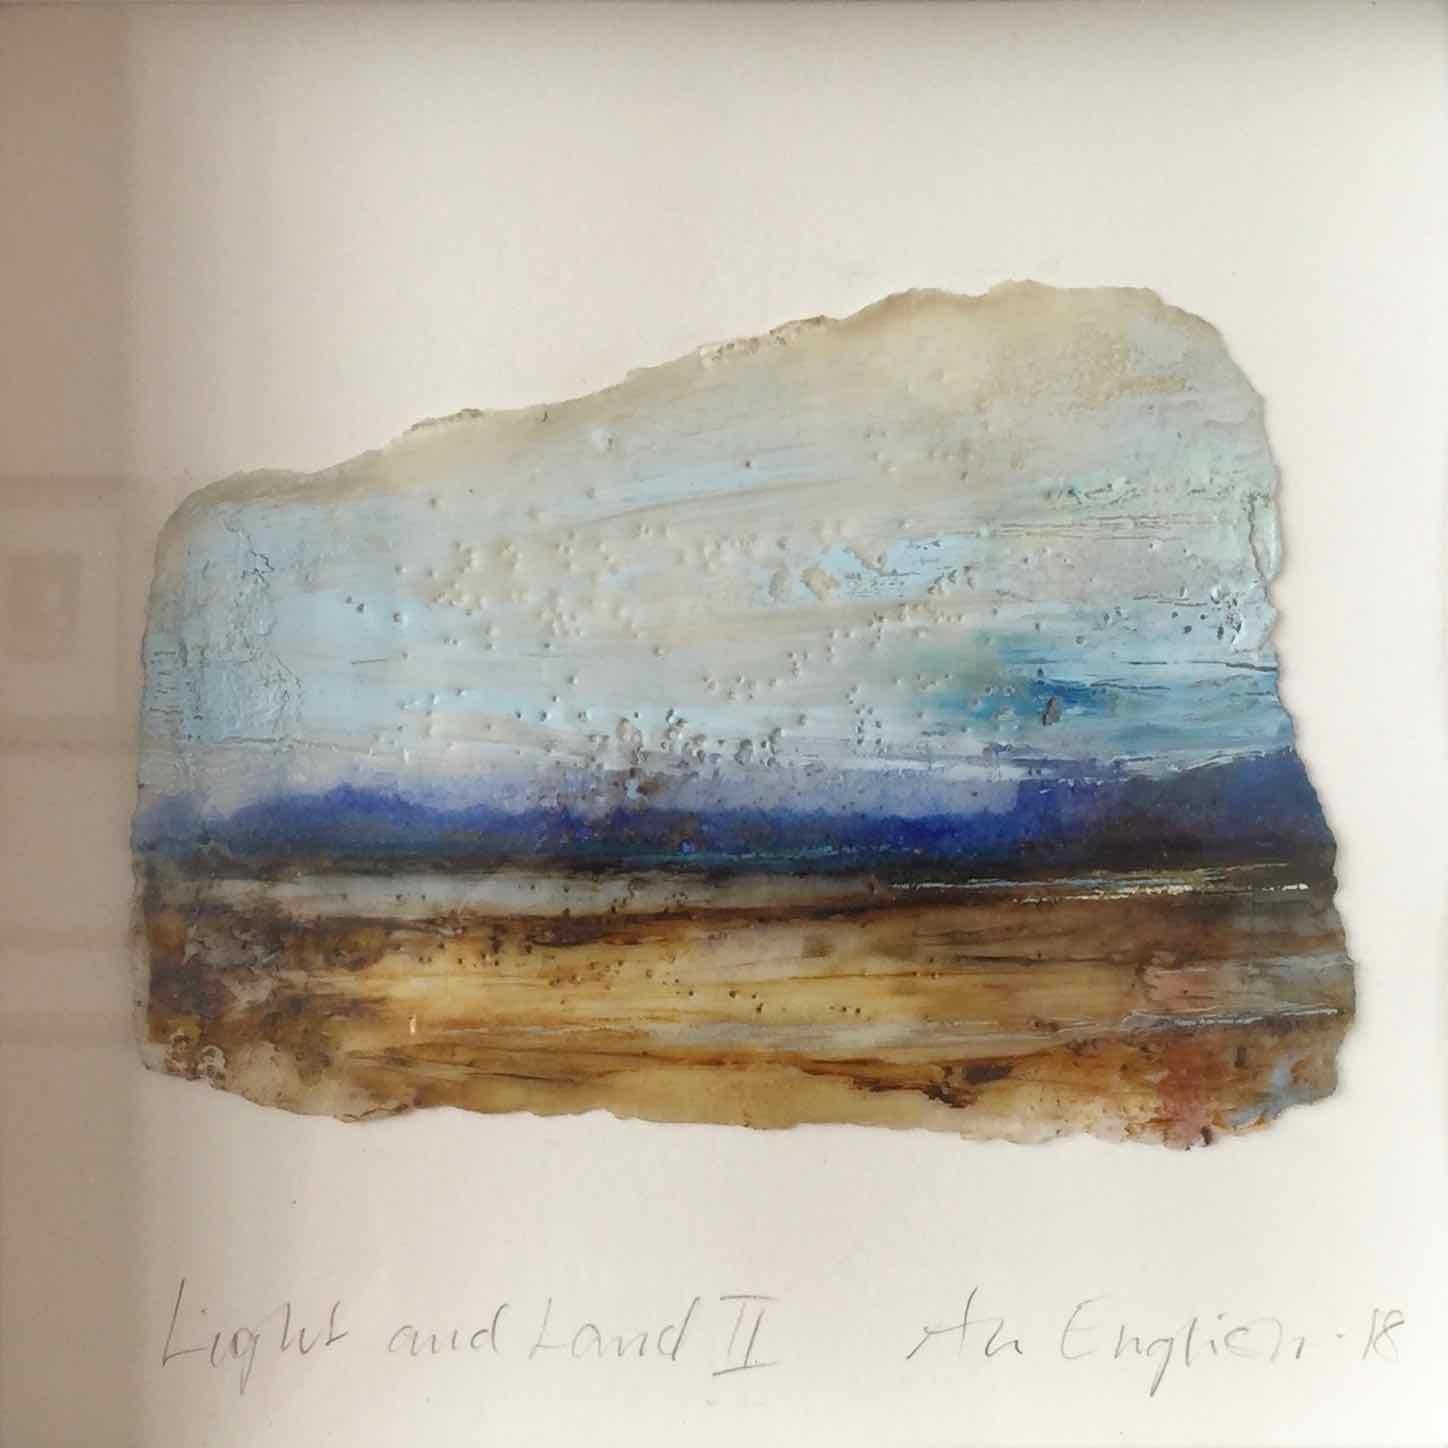 Light and Land II: Postcard-sized painting by Ann-Helen English - Contemporary Mixed Media Art by Ann Helen English